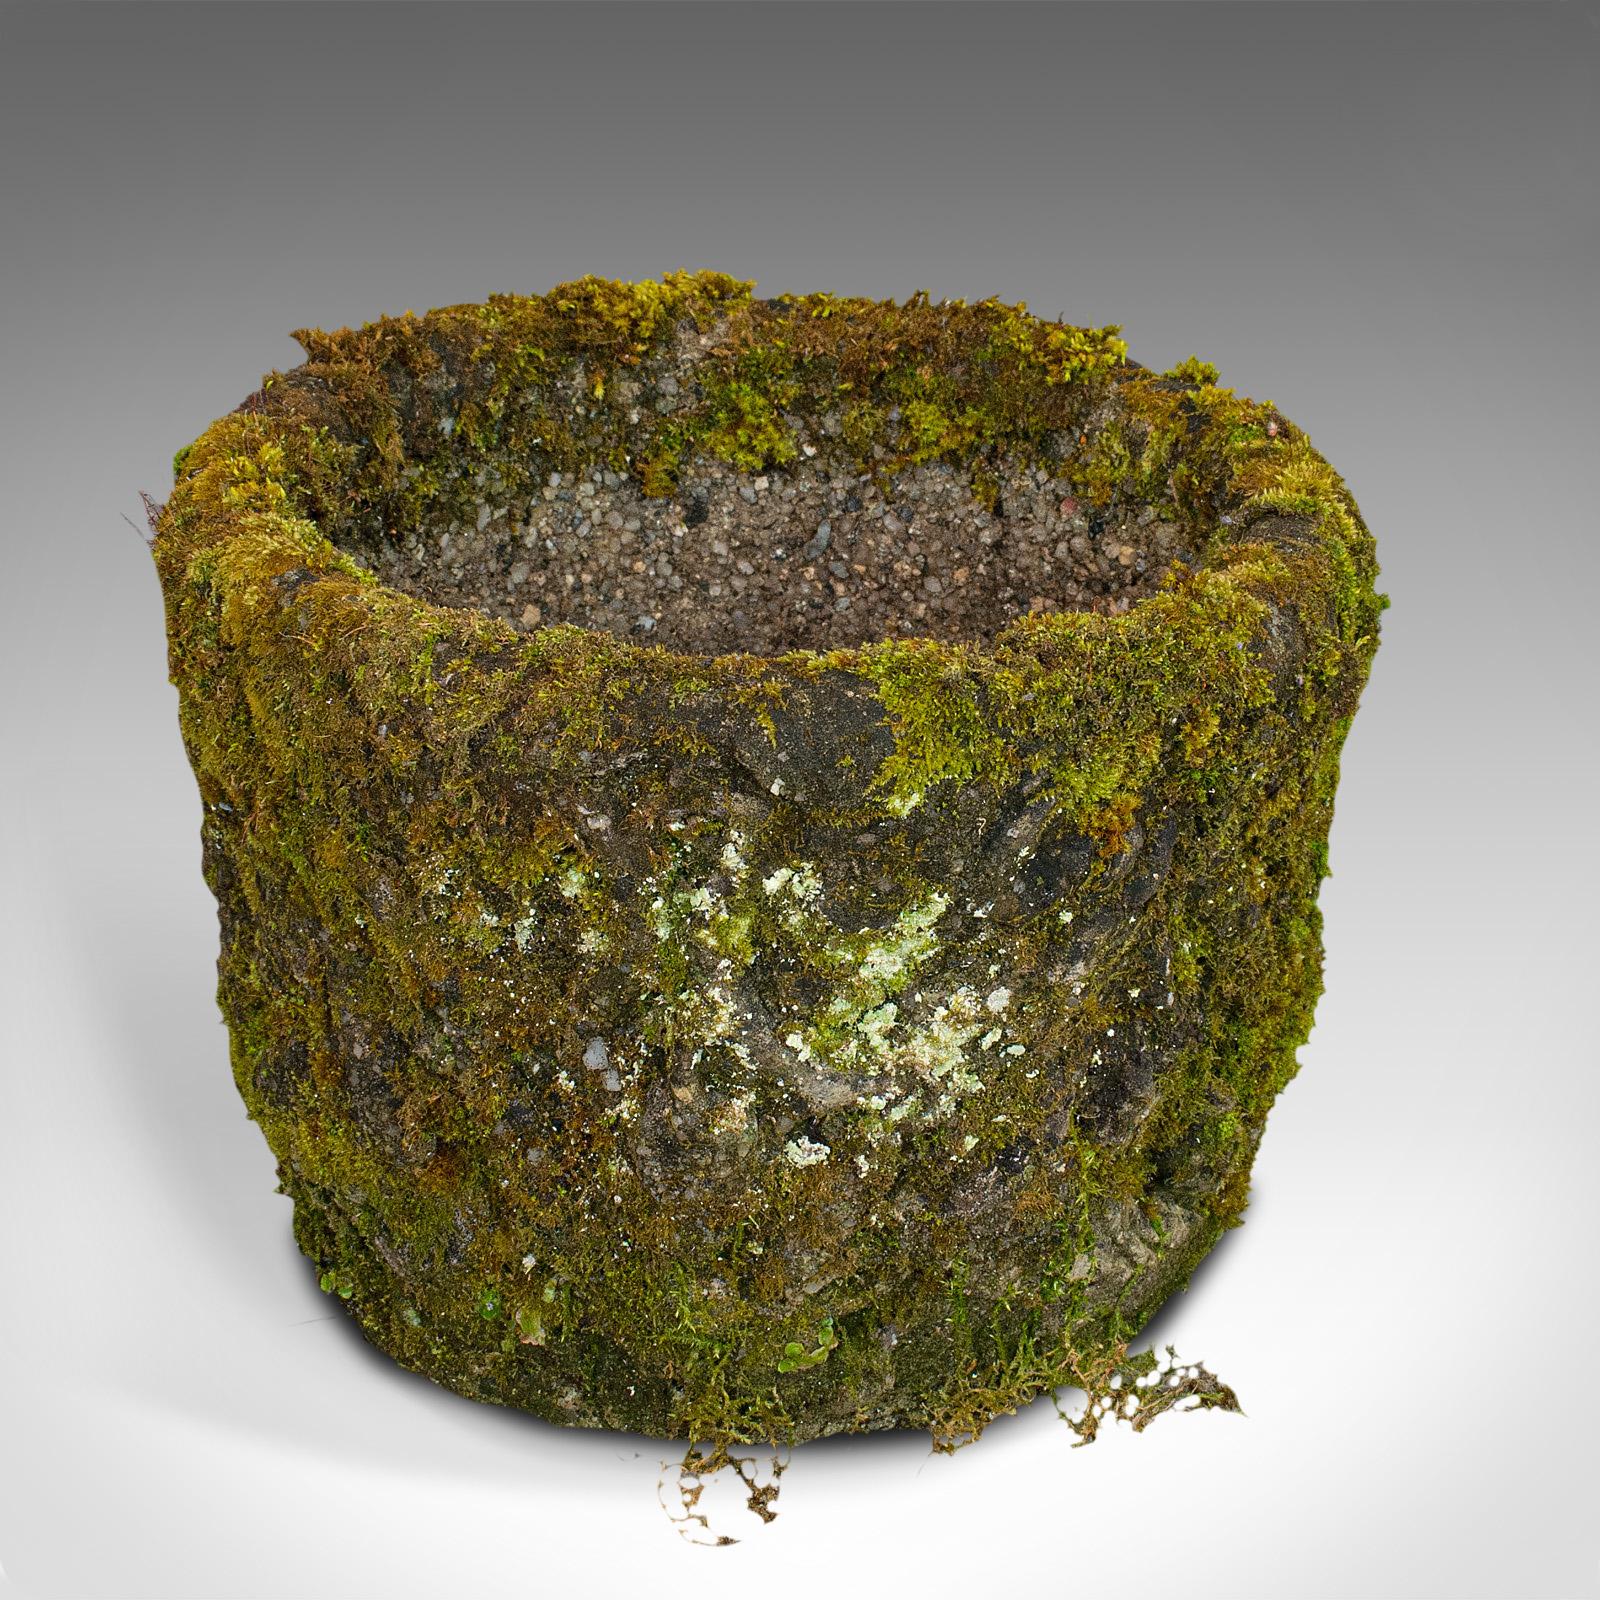 This is a vintage stone planter. An English, reconstituted stone garden pot or jardiniere, dating to the mid 20th century, circa 1960.

Verdant, vibrant and visually appealing
Displays a desirable aged patina
Reconstituted stone well weathered